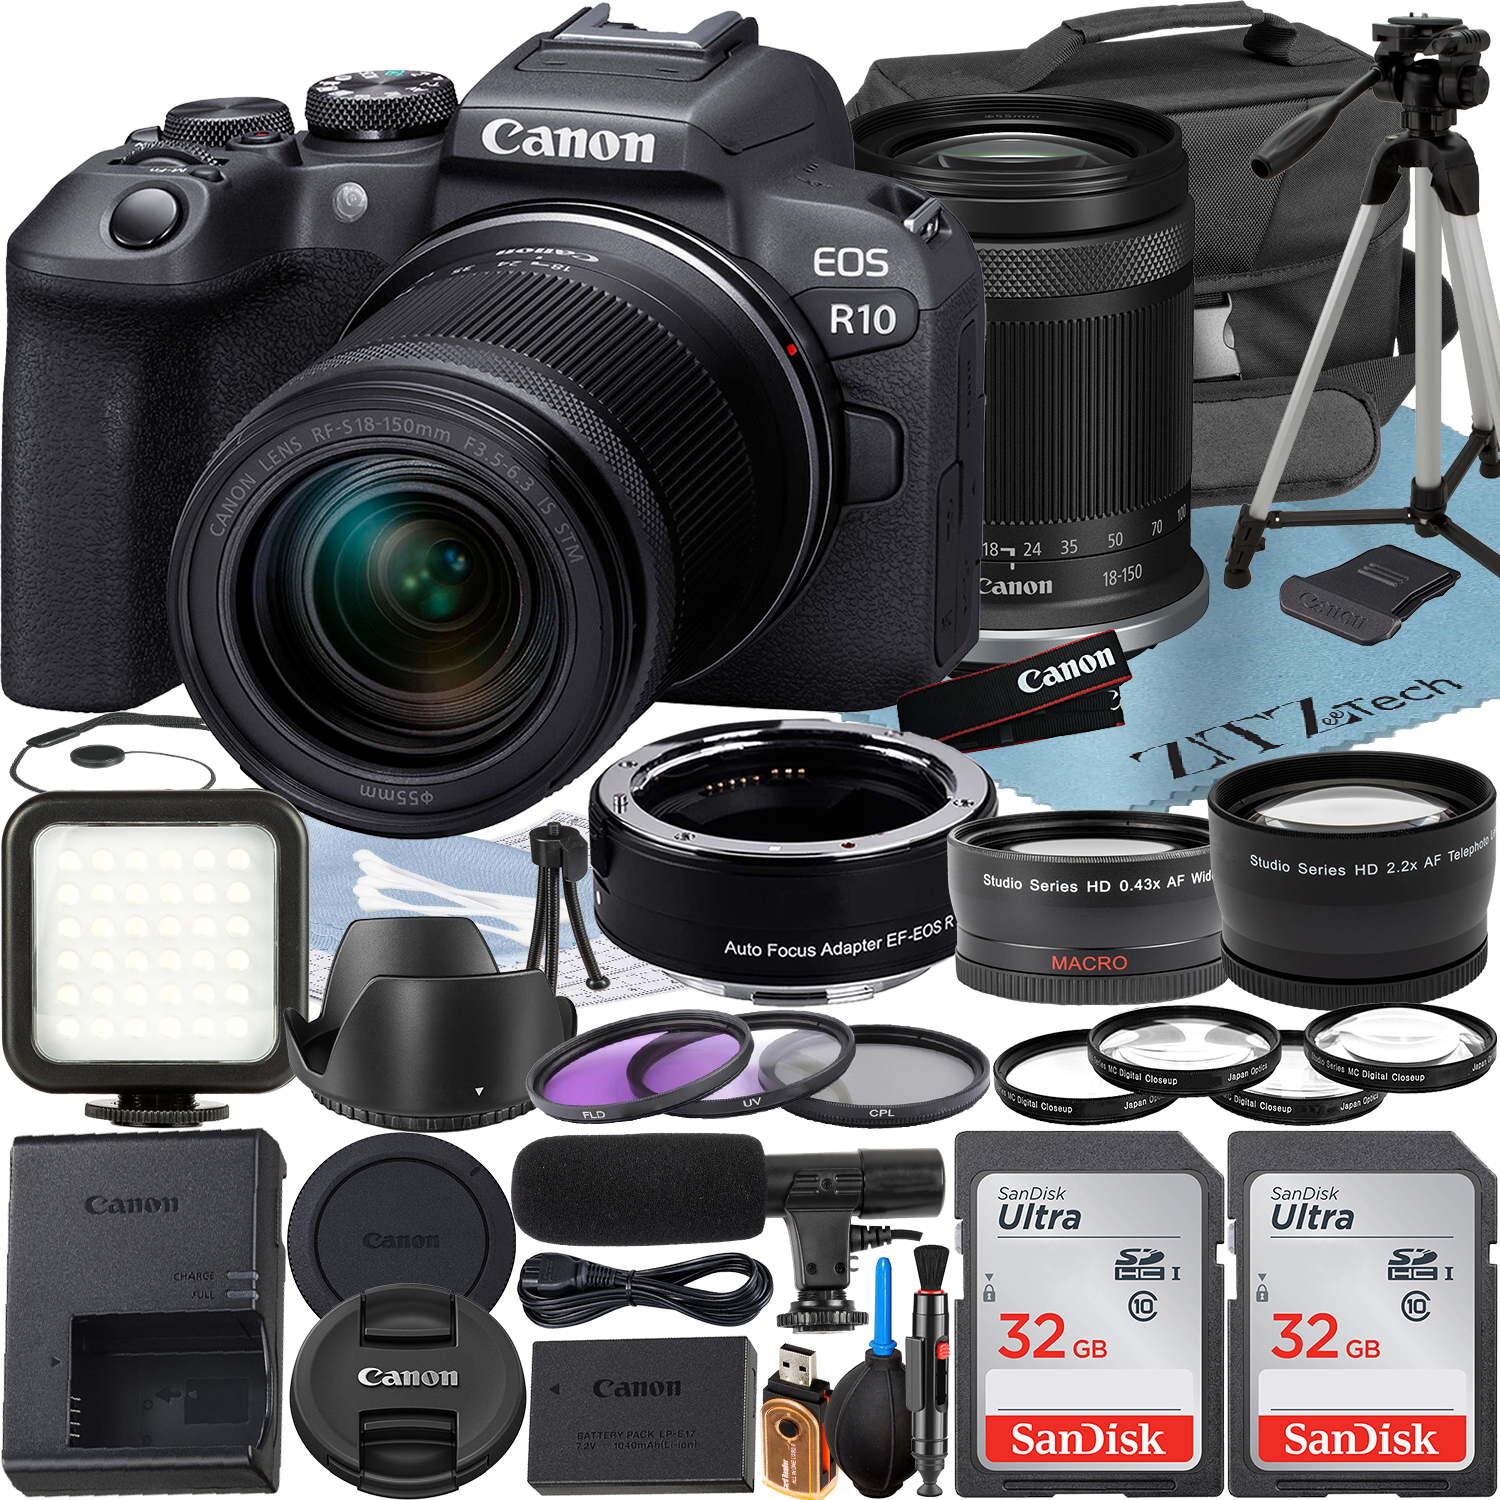 Canon EOS R10 Mirrorless Camera with RF-S 18-150mm Lens + Mount Adapter + 2 Pack SanDisk 32GB Memory Card + Case + ZeeTech Accessory